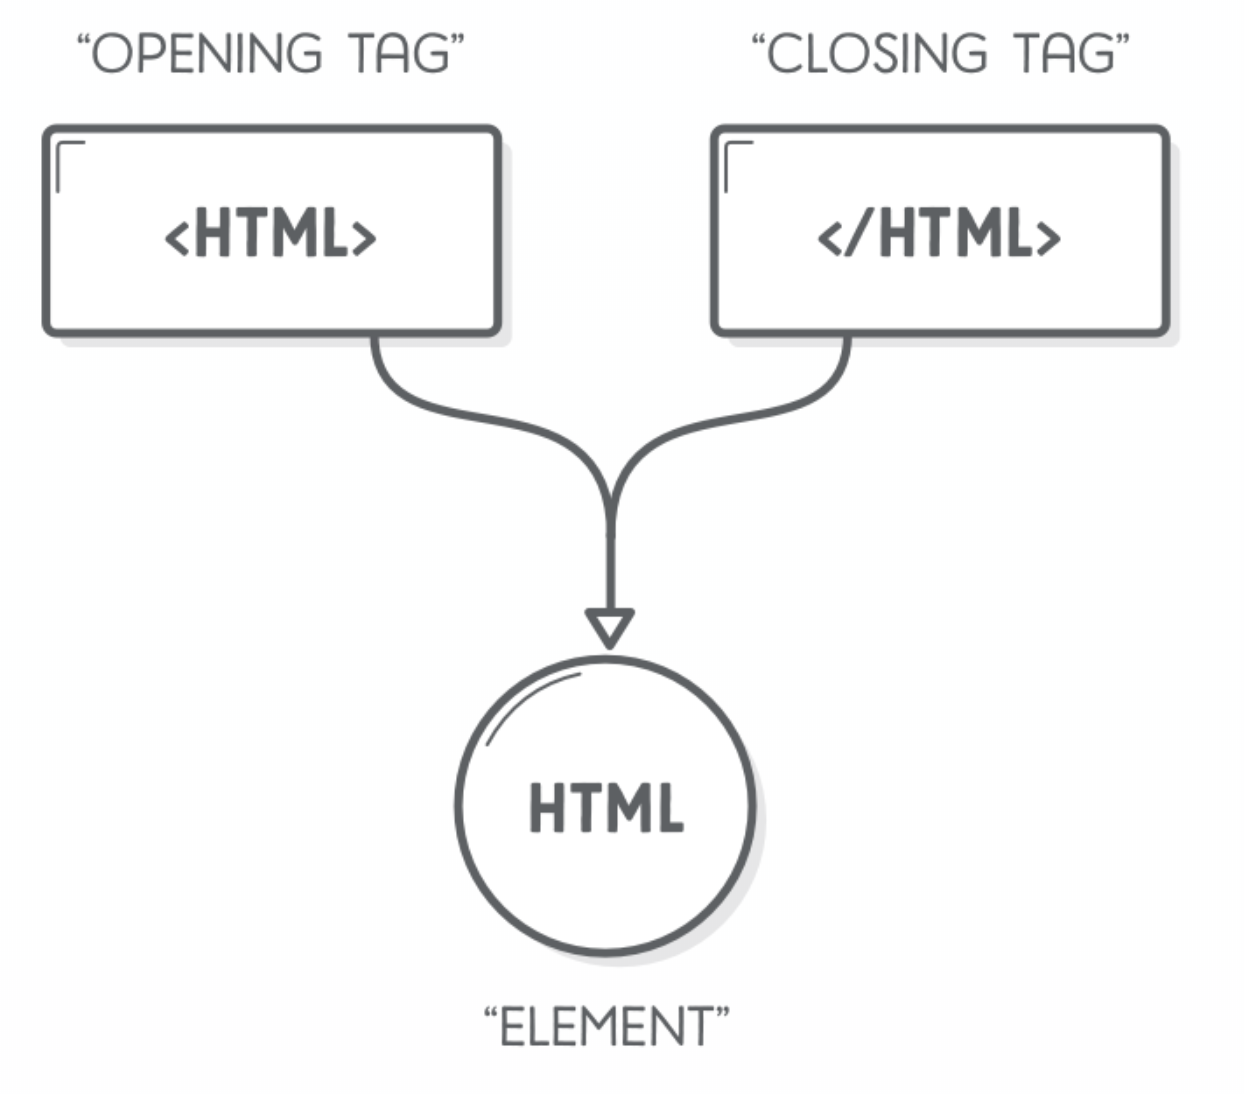 Section element. Элементы html. MDN html. Html tags. For элемент html.